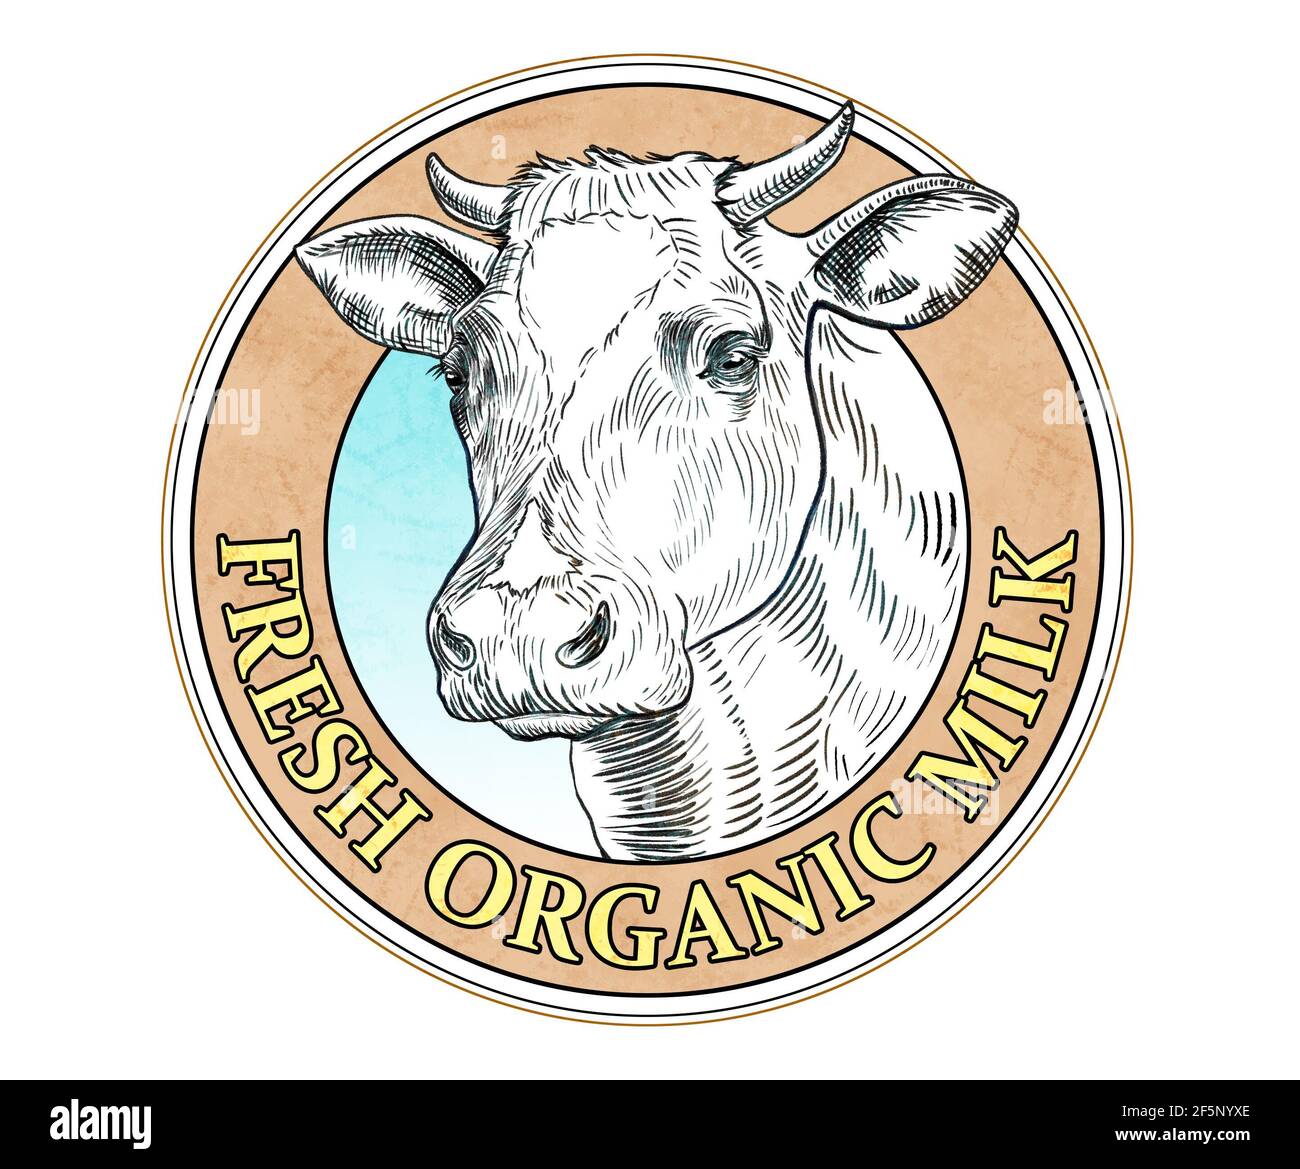 Milk label with a cow head drawn with black ink. Digital illustration. Stock Photo